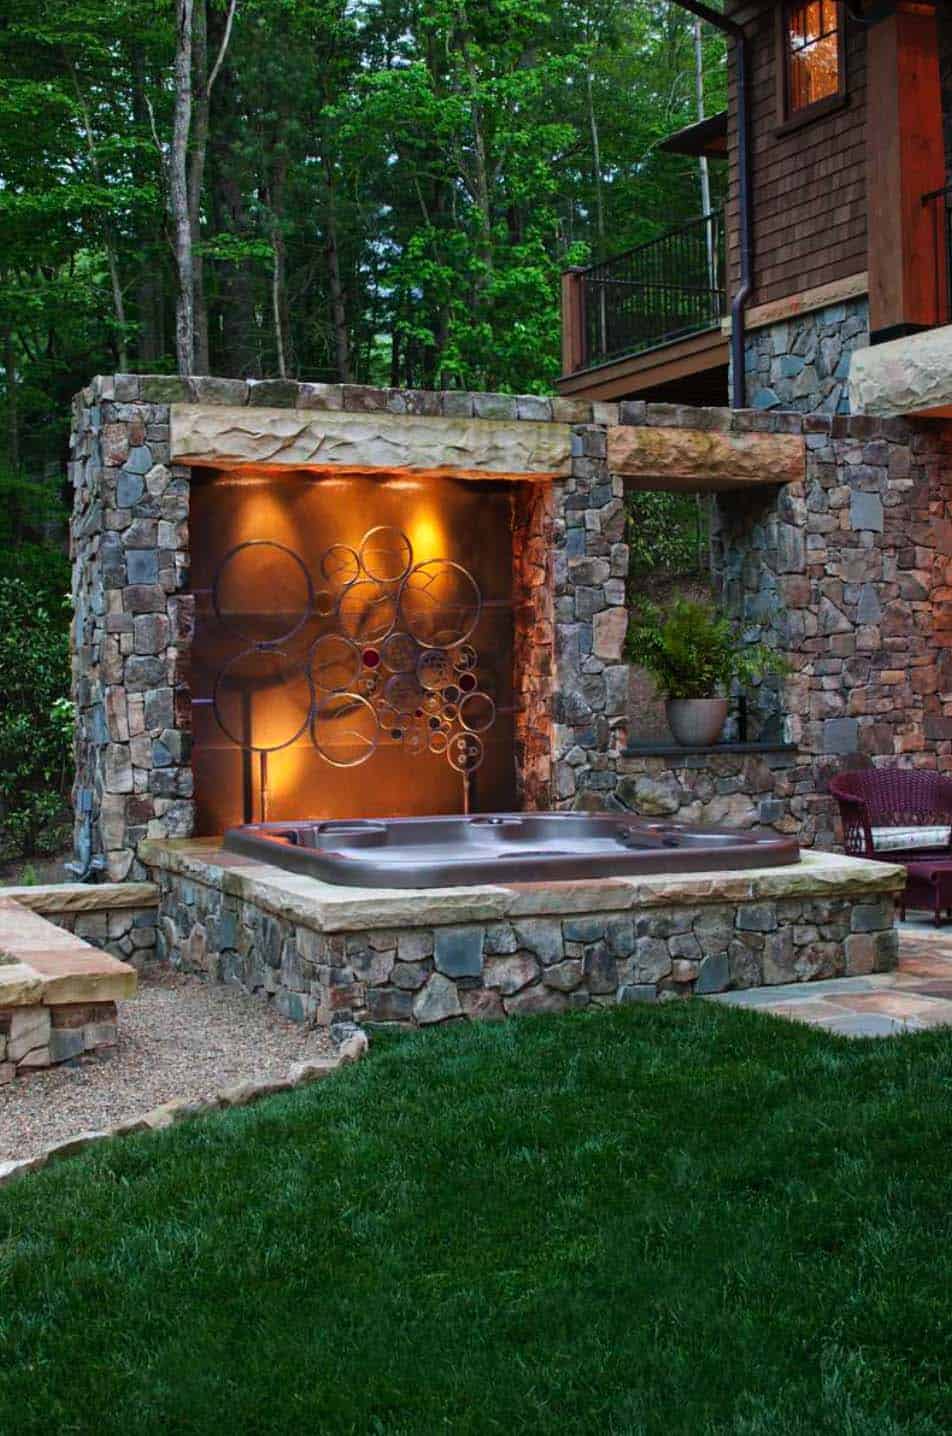 40 Outstanding Hot Tub Ideas To Create A Backyard Oasis - Patio With Fireplace And Hot Tub